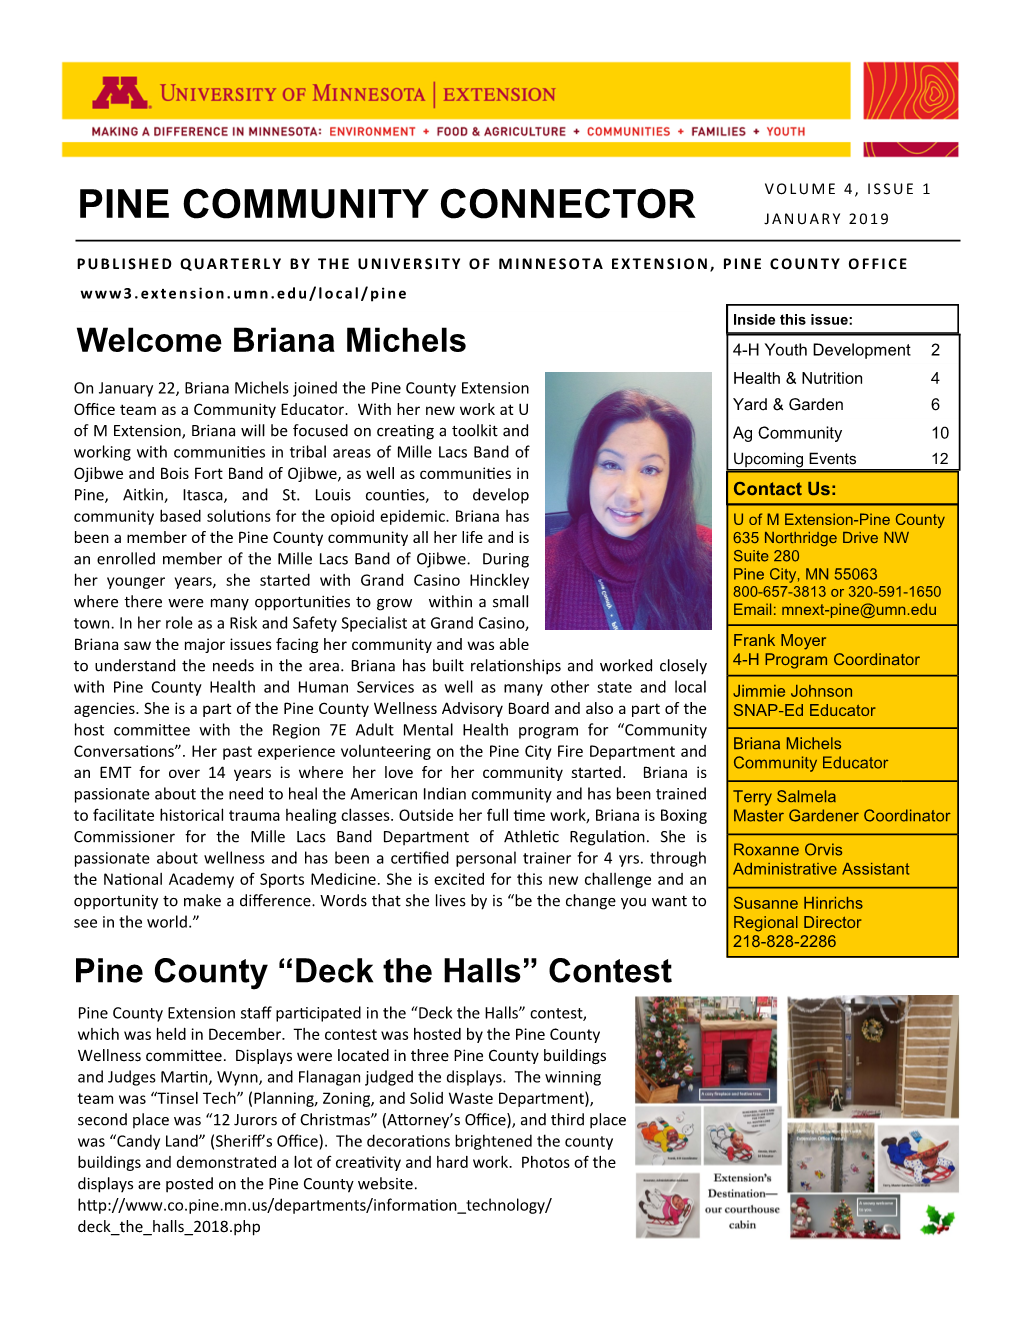 Pine Community Connector January 2019